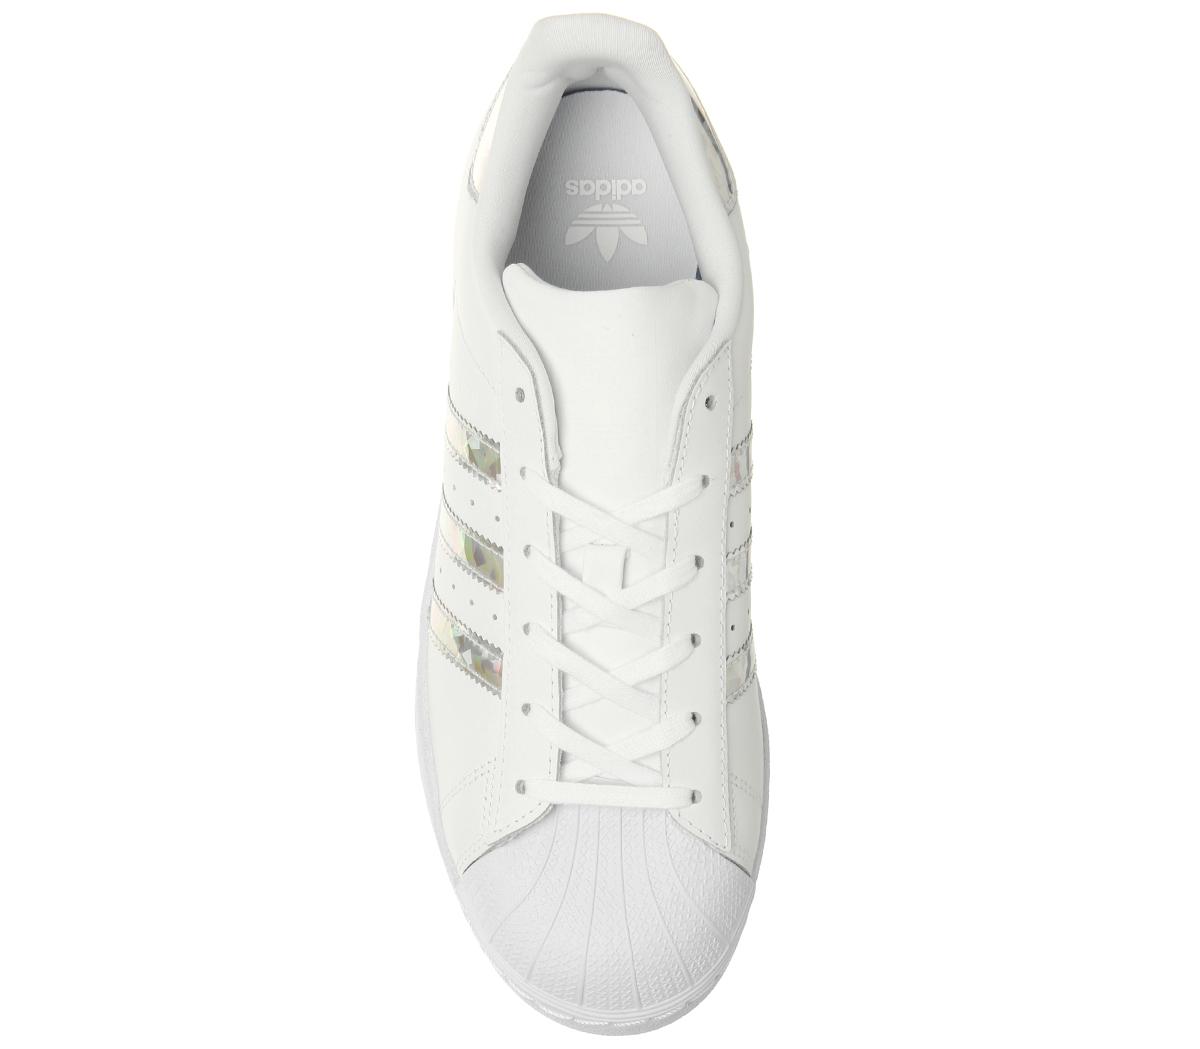 adidas superstar gs white silver holographic